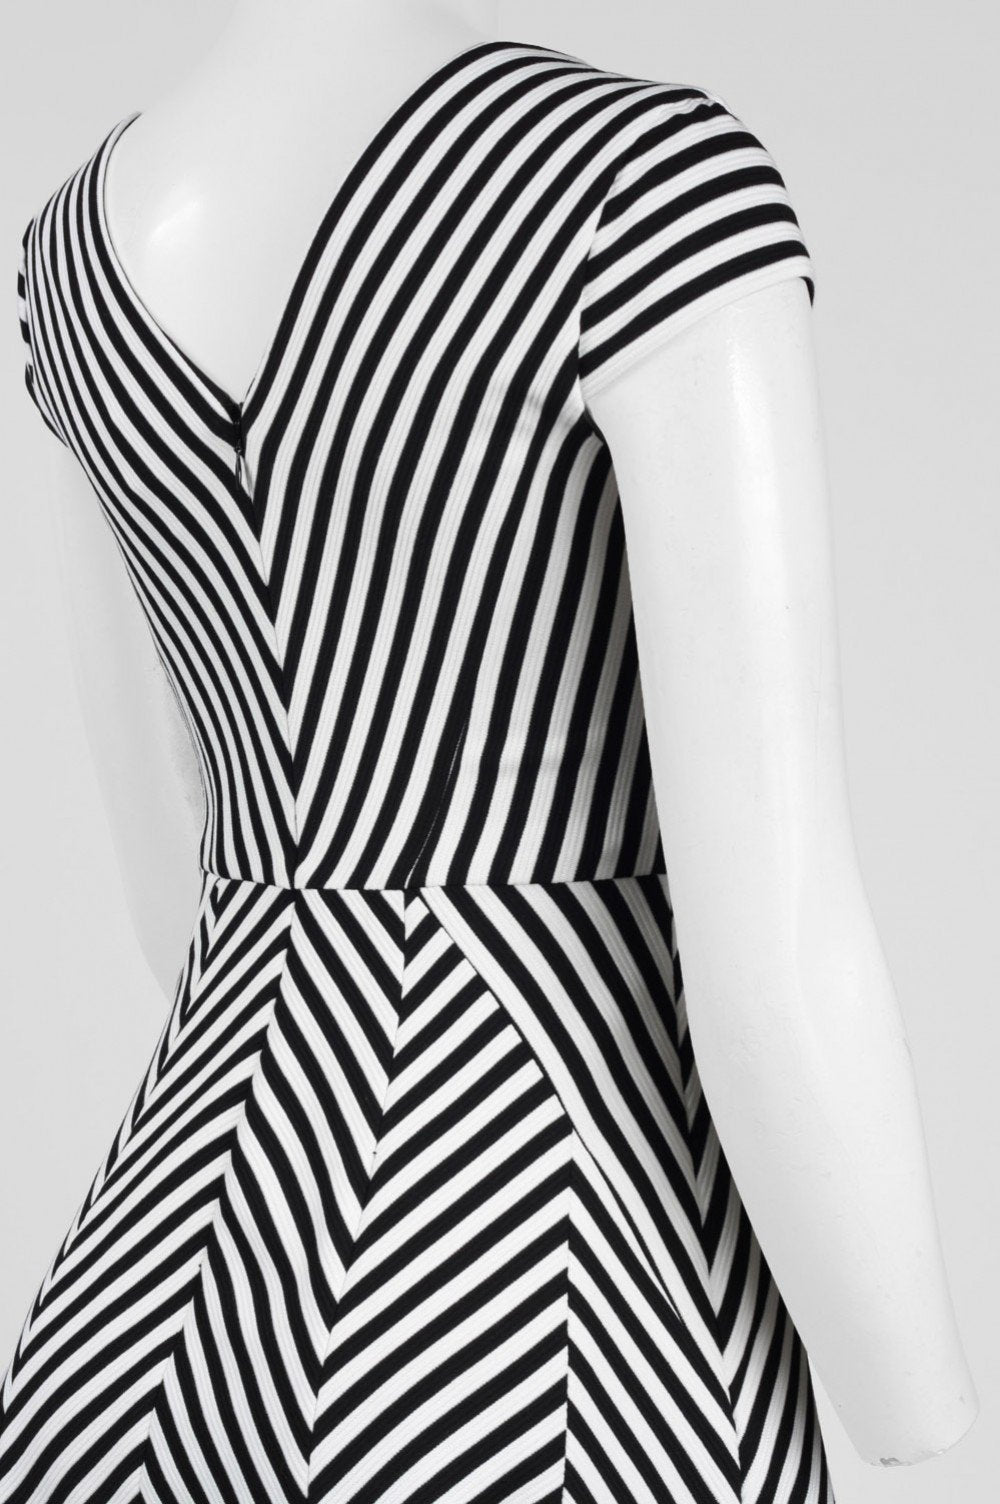 Adrianna Papell - AP1D100624 Striped V-Neck A-Line Short Dress In Black and White